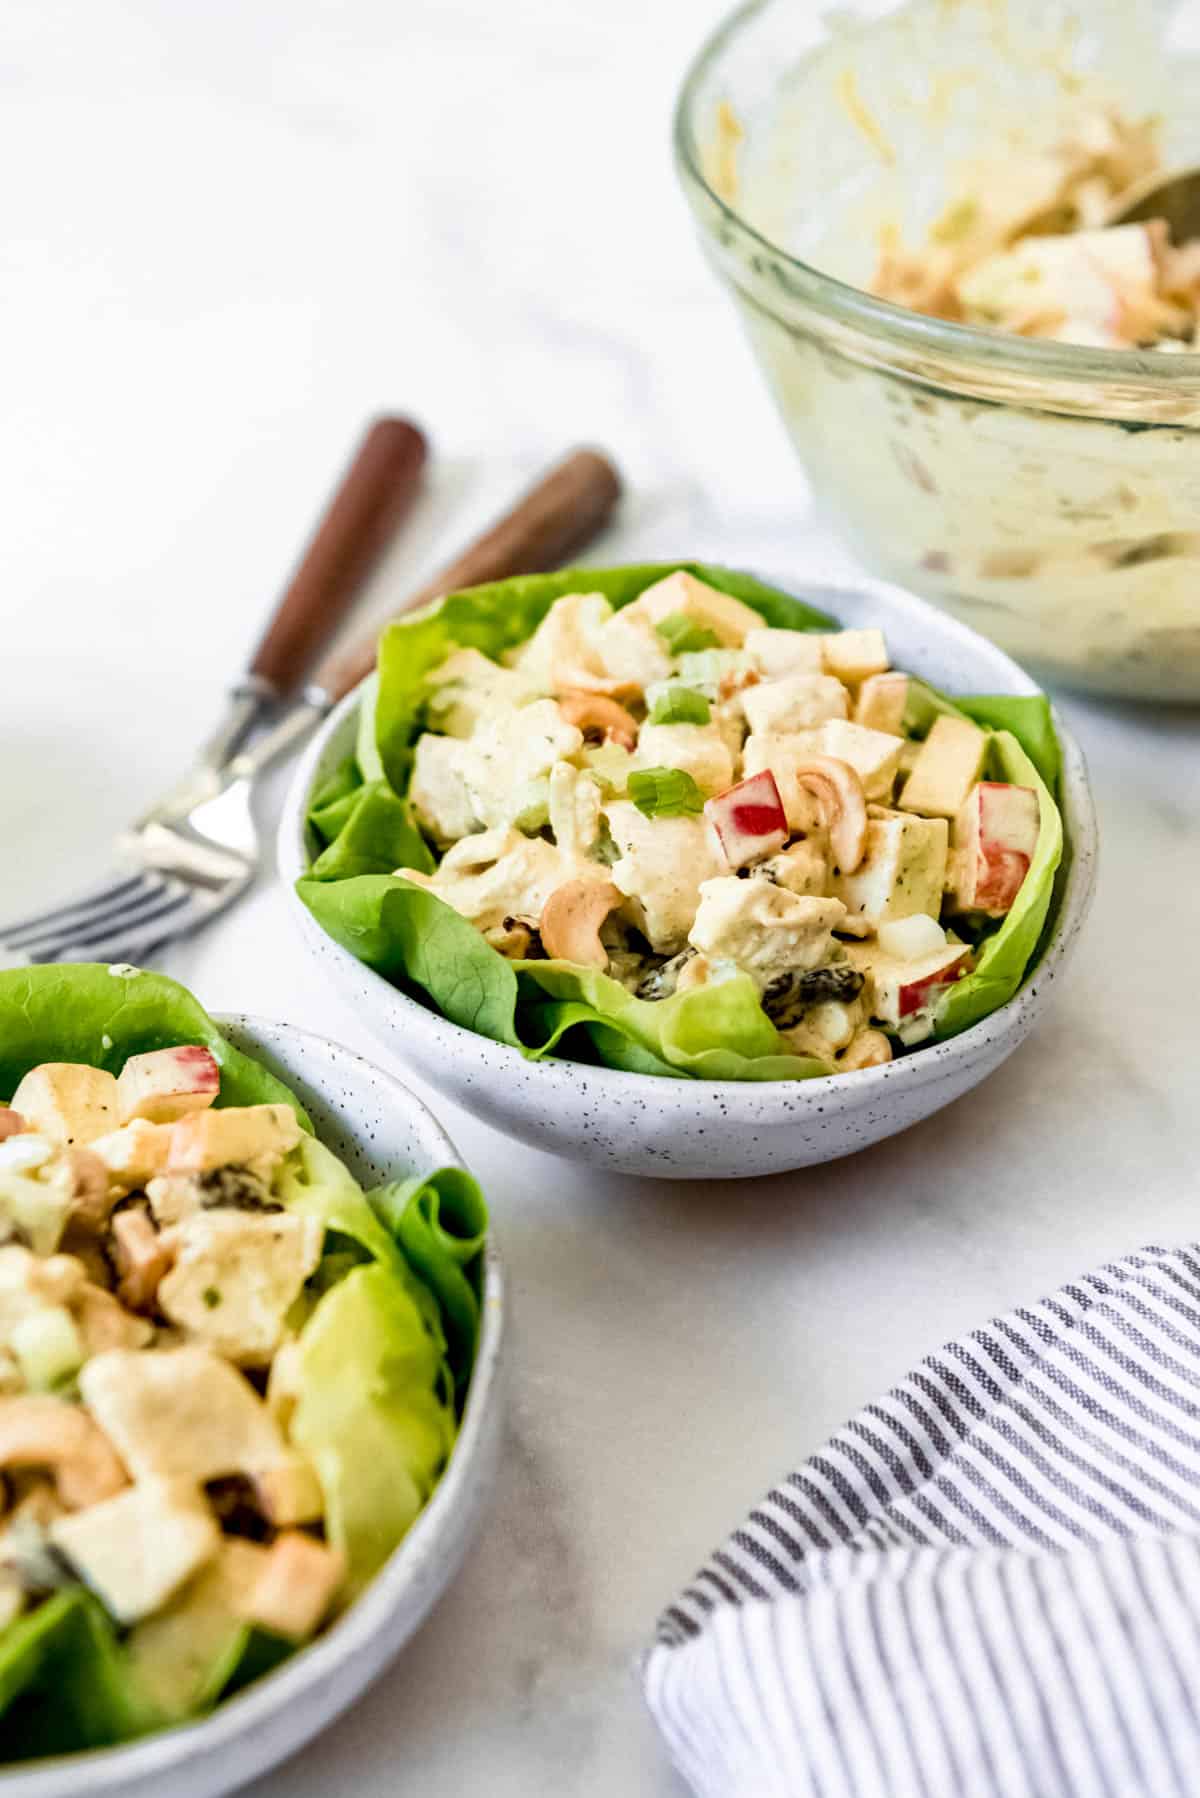 Curried chicken salad served in two bowls with a bed of lettuce.